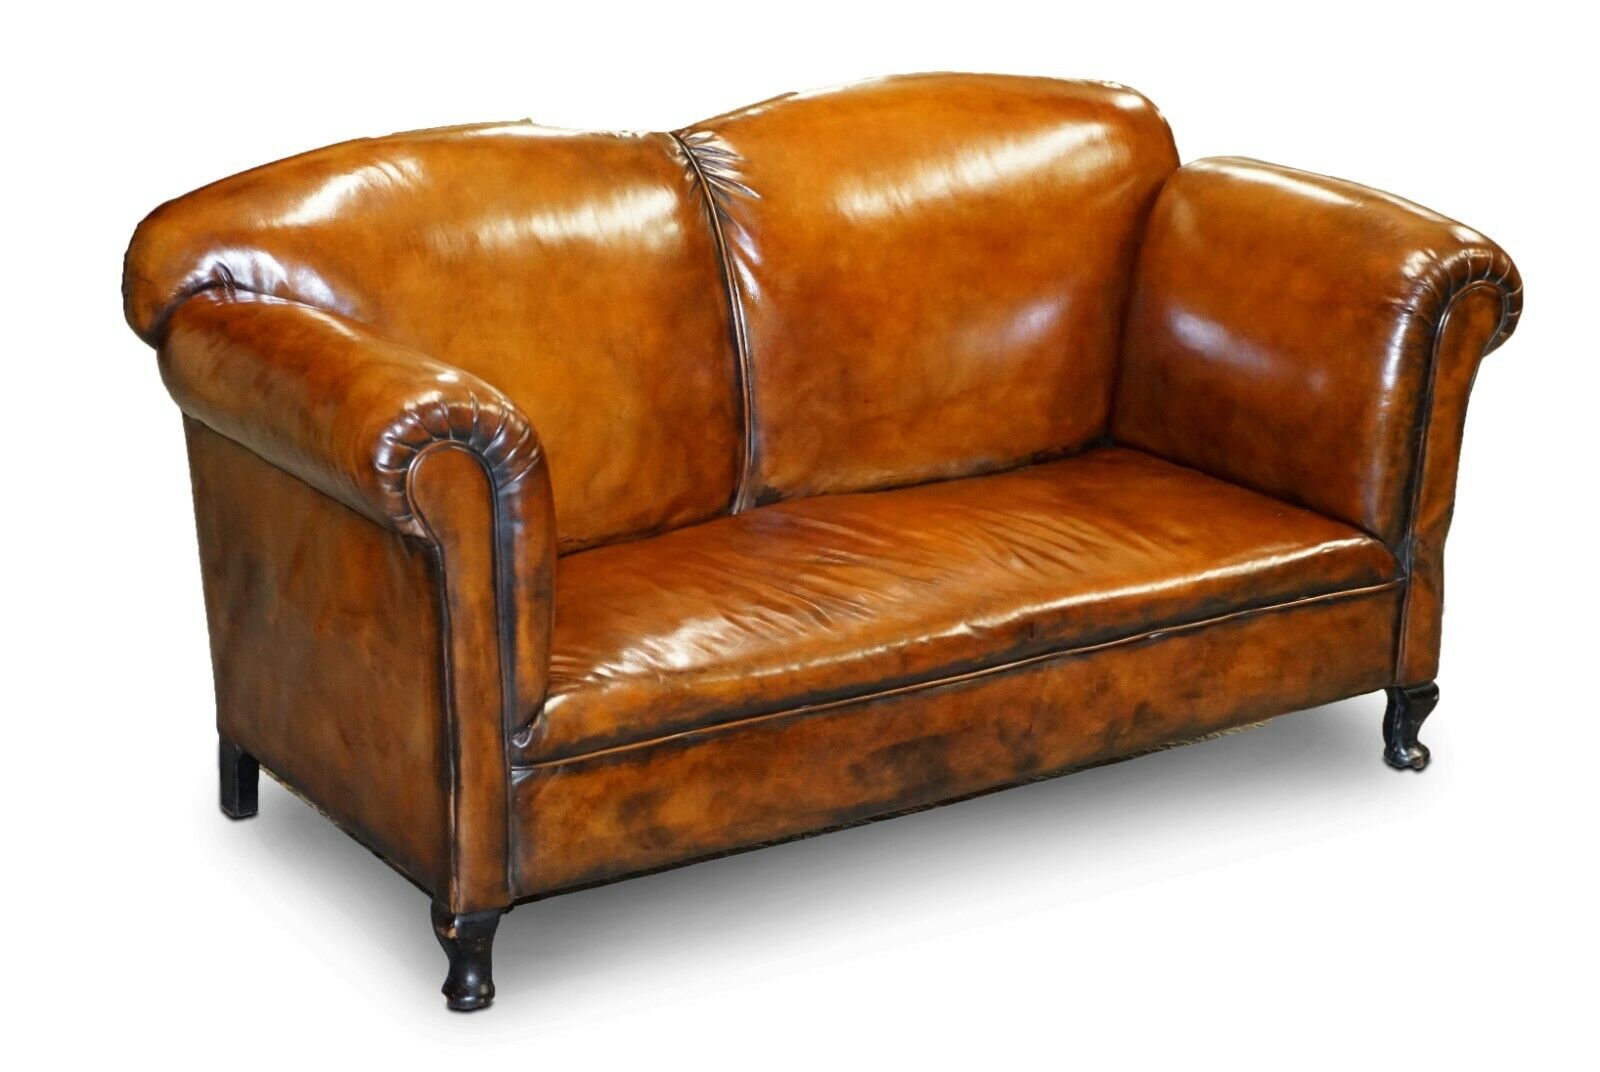 FULLY RESTORED WHISKY BROWN LEATHER DROP ARM CHAISE LOUNGE SOFA HORSE HAIR FILL